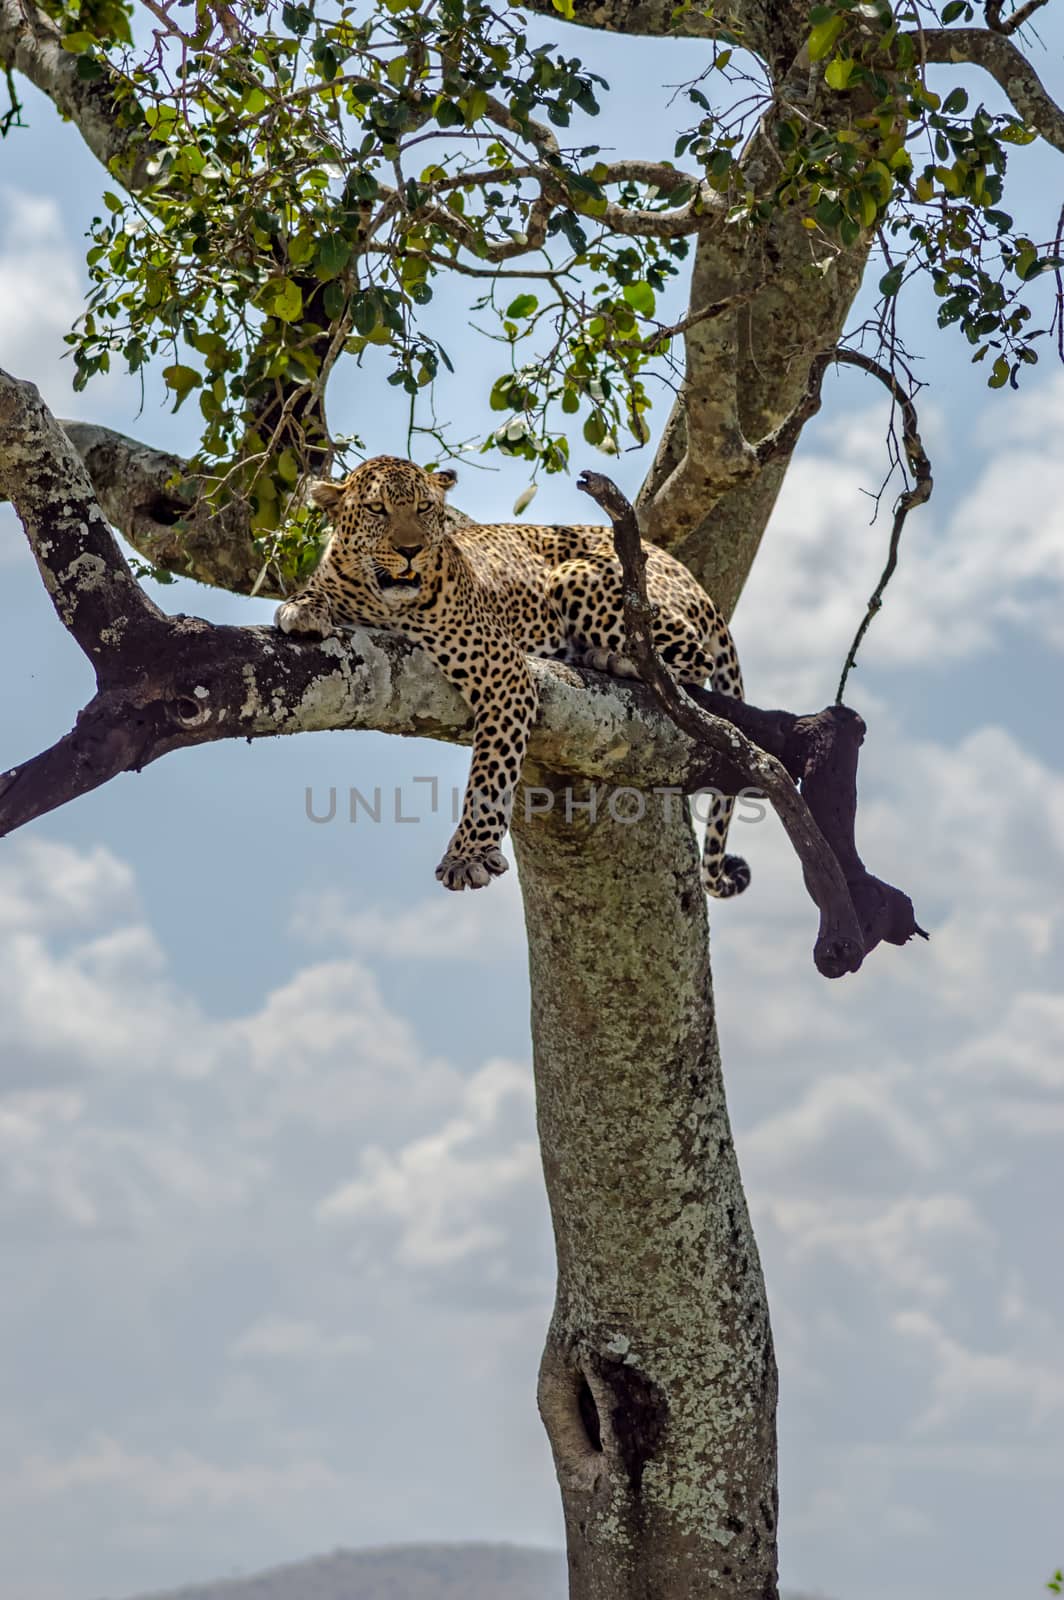 Leopard lying on a branch of a tree in the Masai Mara by Philou1000